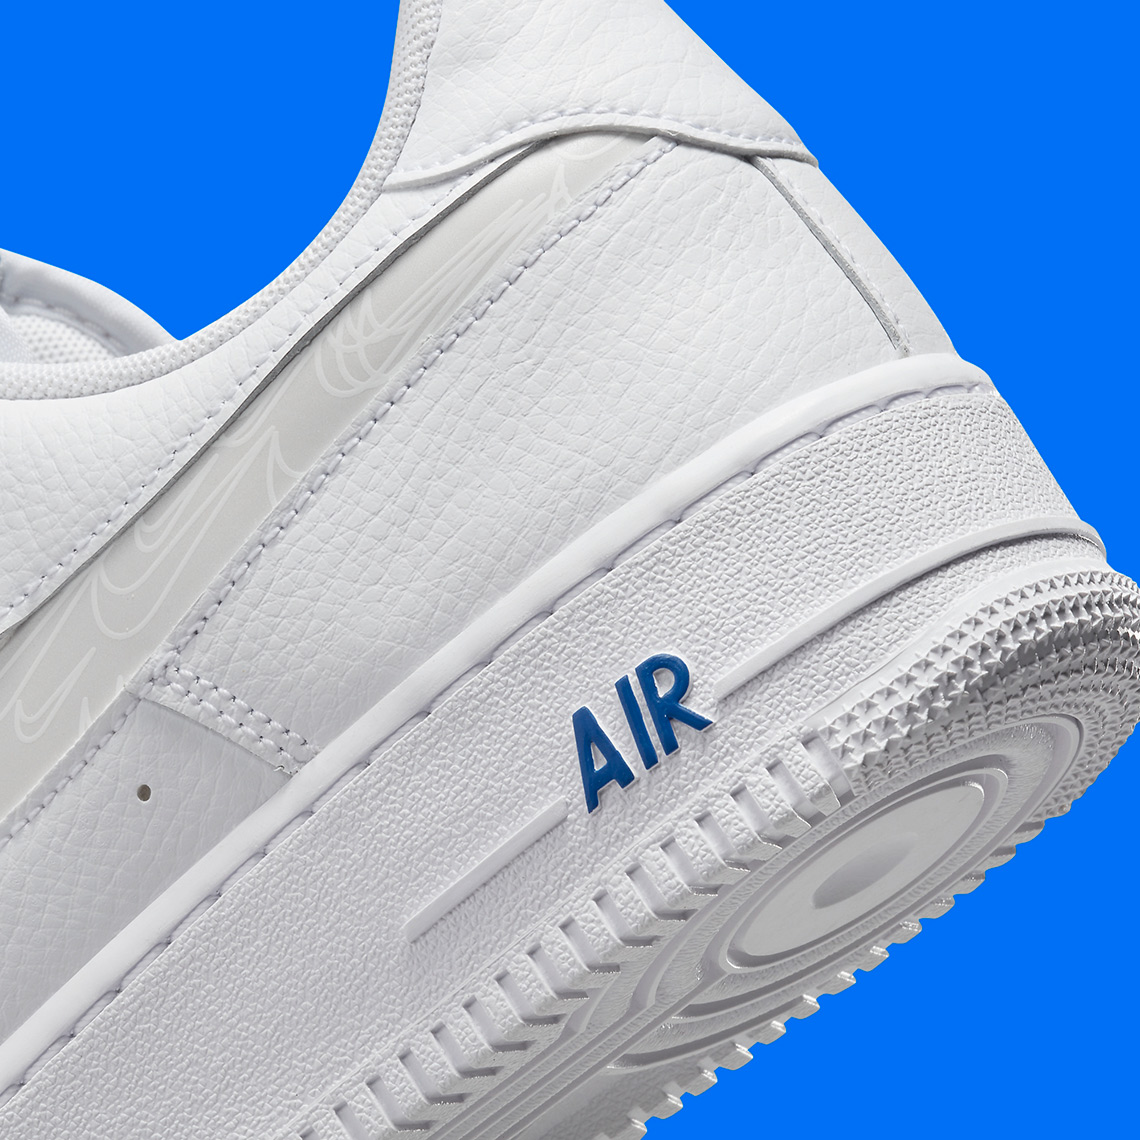 Nike Air Force 1 Low Cut Out 'Reflective Swoosh White Blue' FB8971